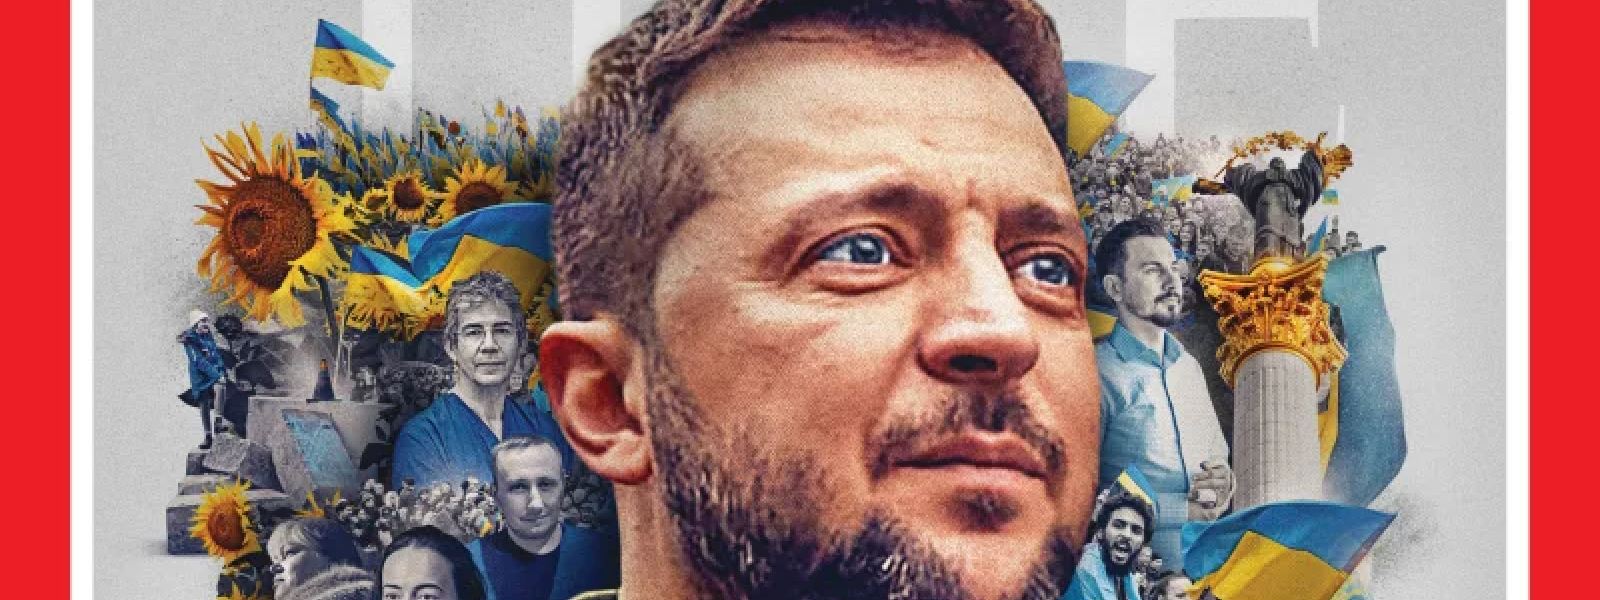 2022 Person of the year is Volodymyr Zelensky